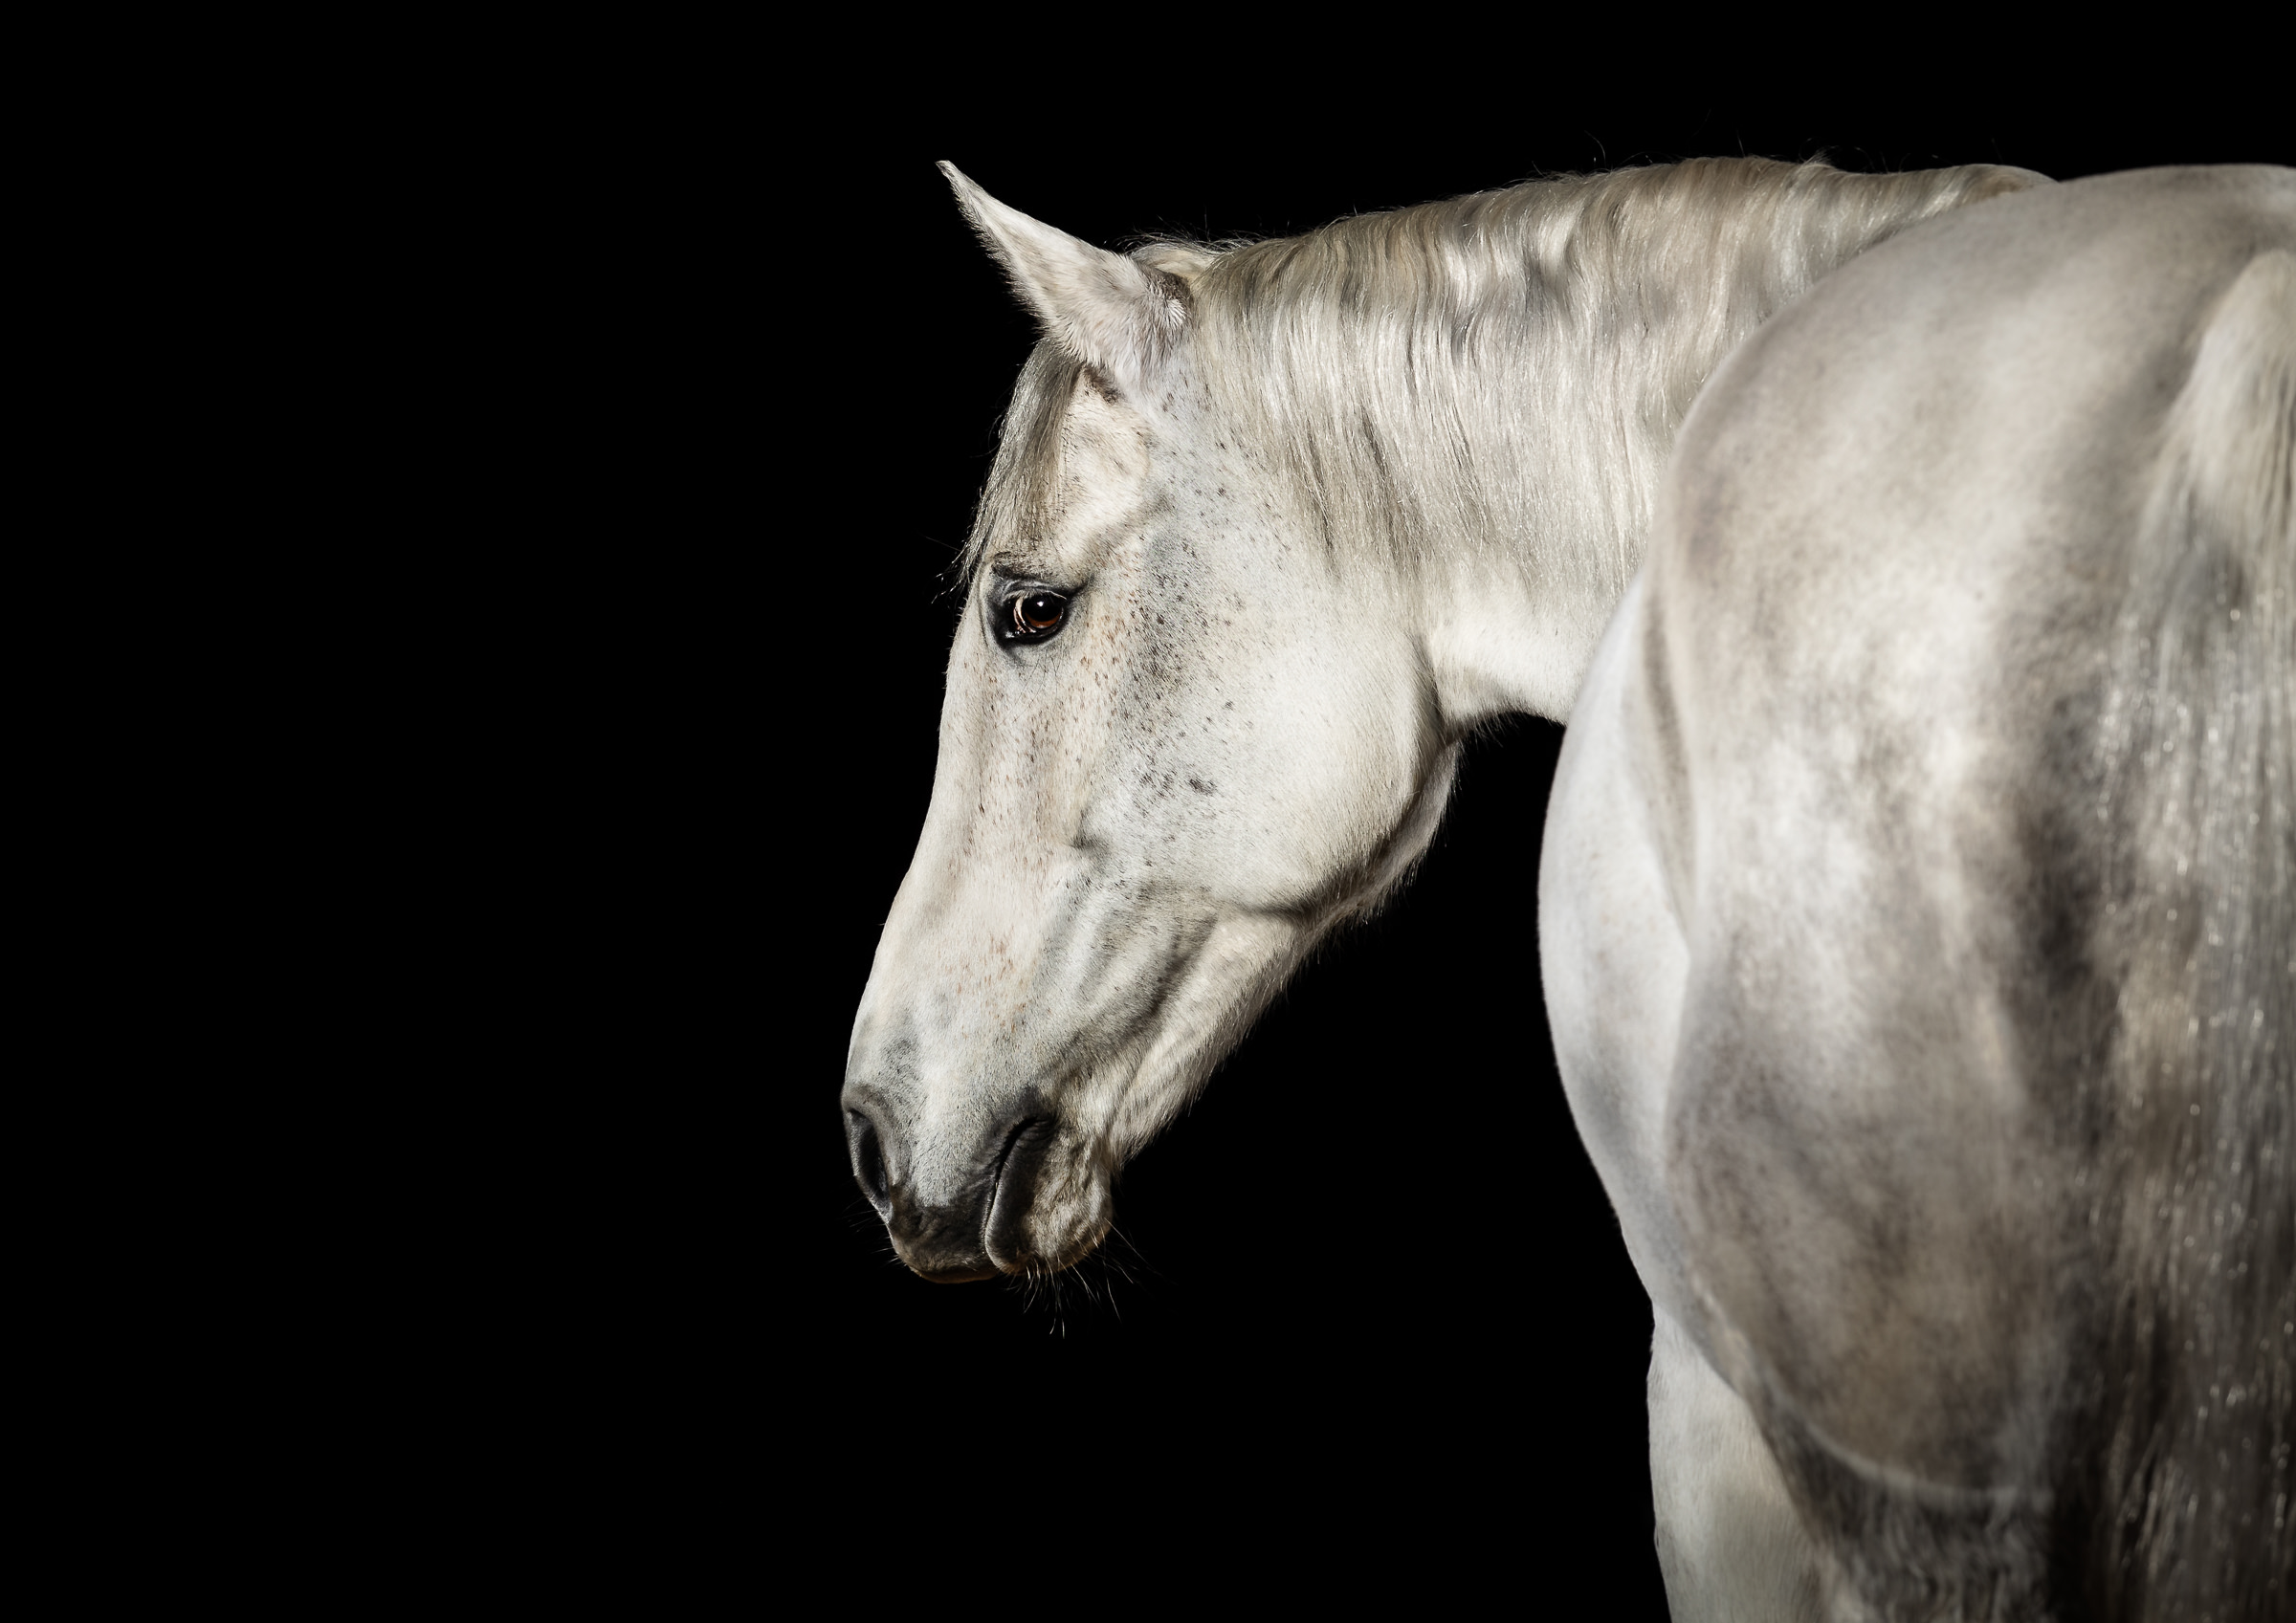 horse photograph of a grey horse with a black background looking back at the camera